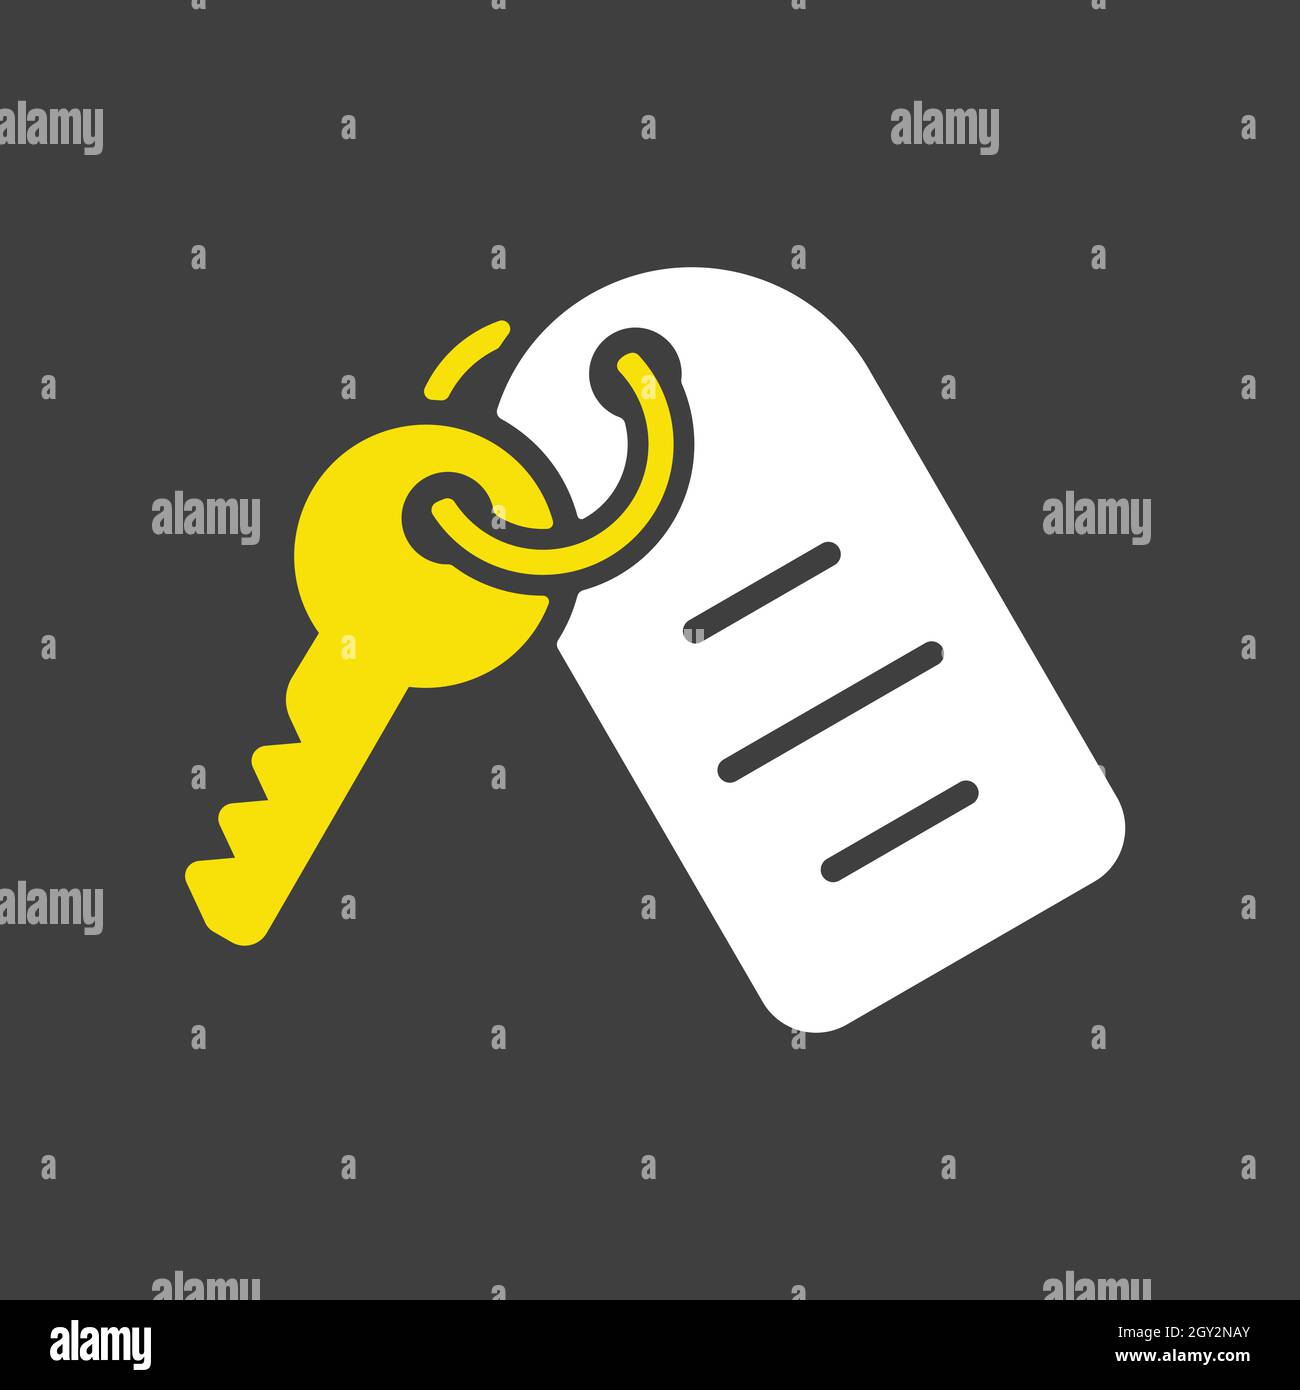 Hotel room key with number vector glyph icon on dark background. Graph symbol for travel and tourism web site and apps design, logo, app, UI Stock Vector